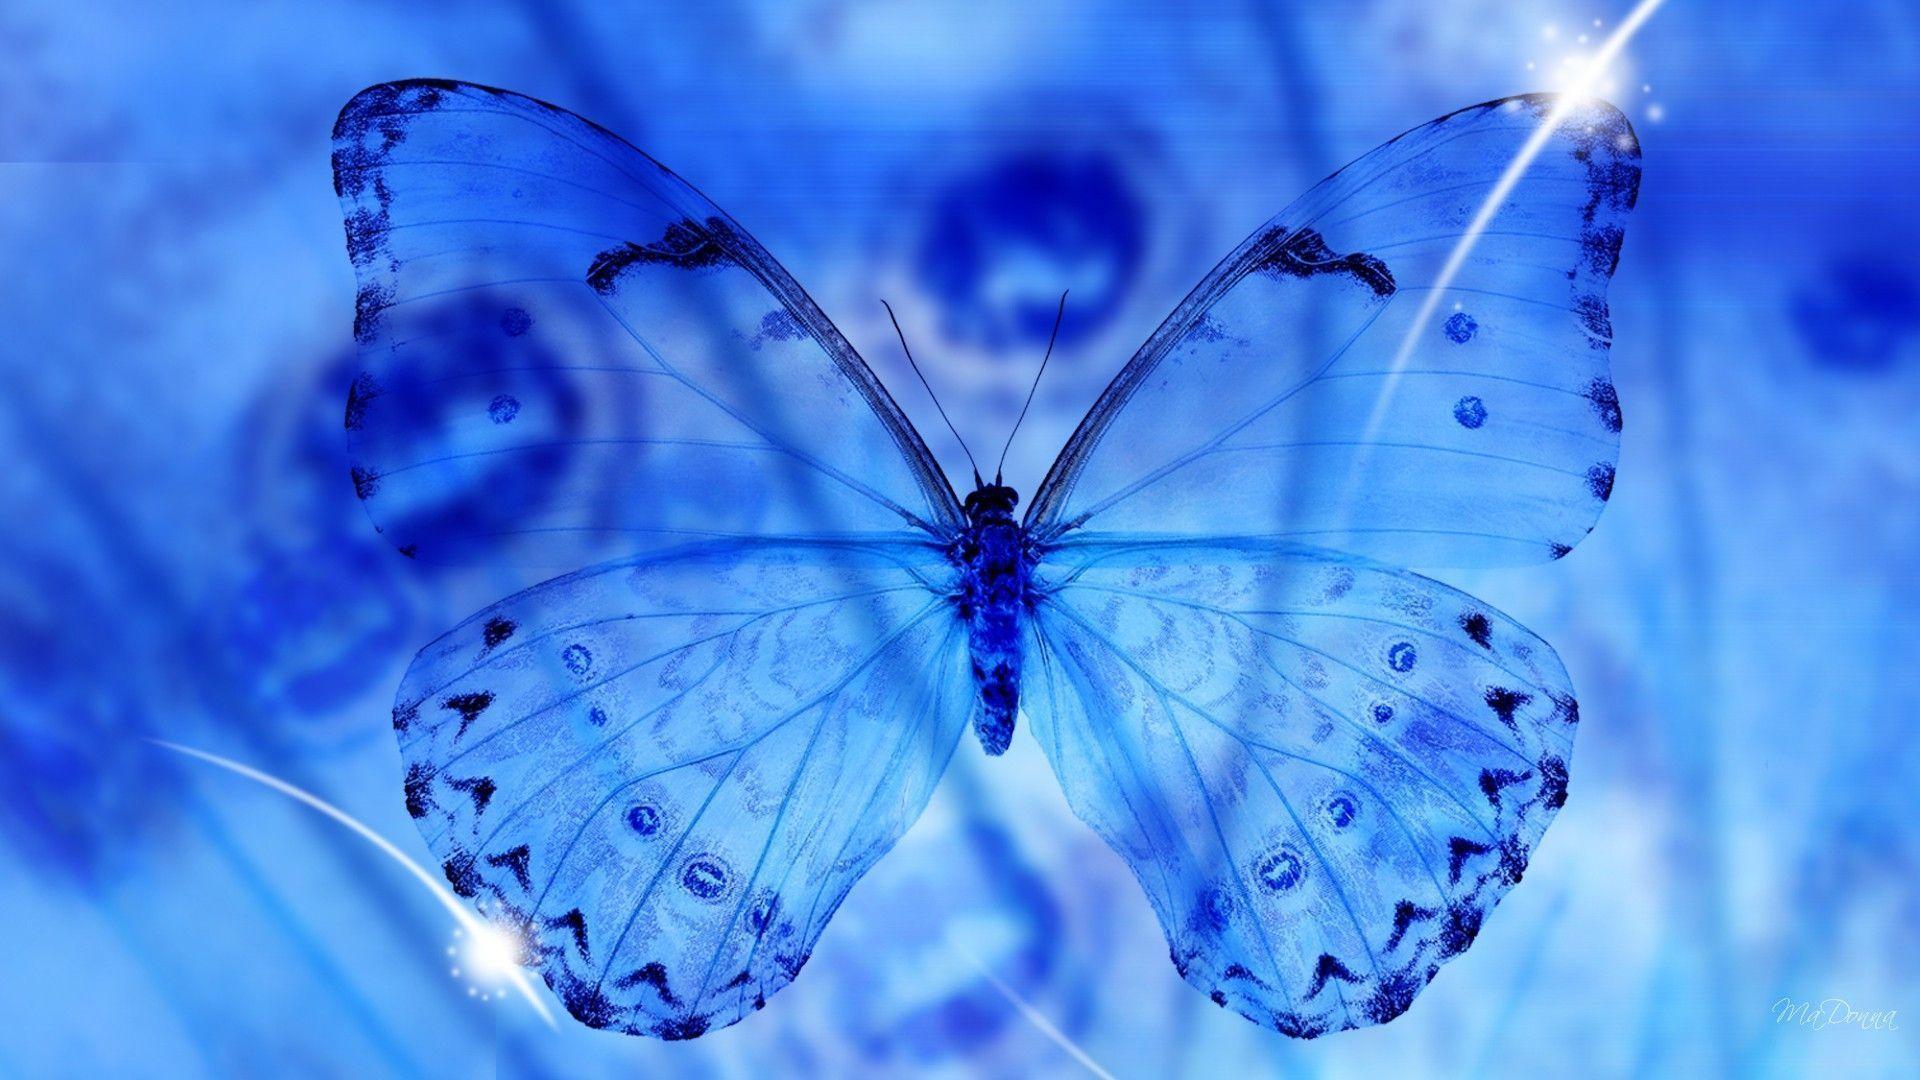 Blue Butterfly Photos Download The BEST Free Blue Butterfly Stock Photos   HD Images